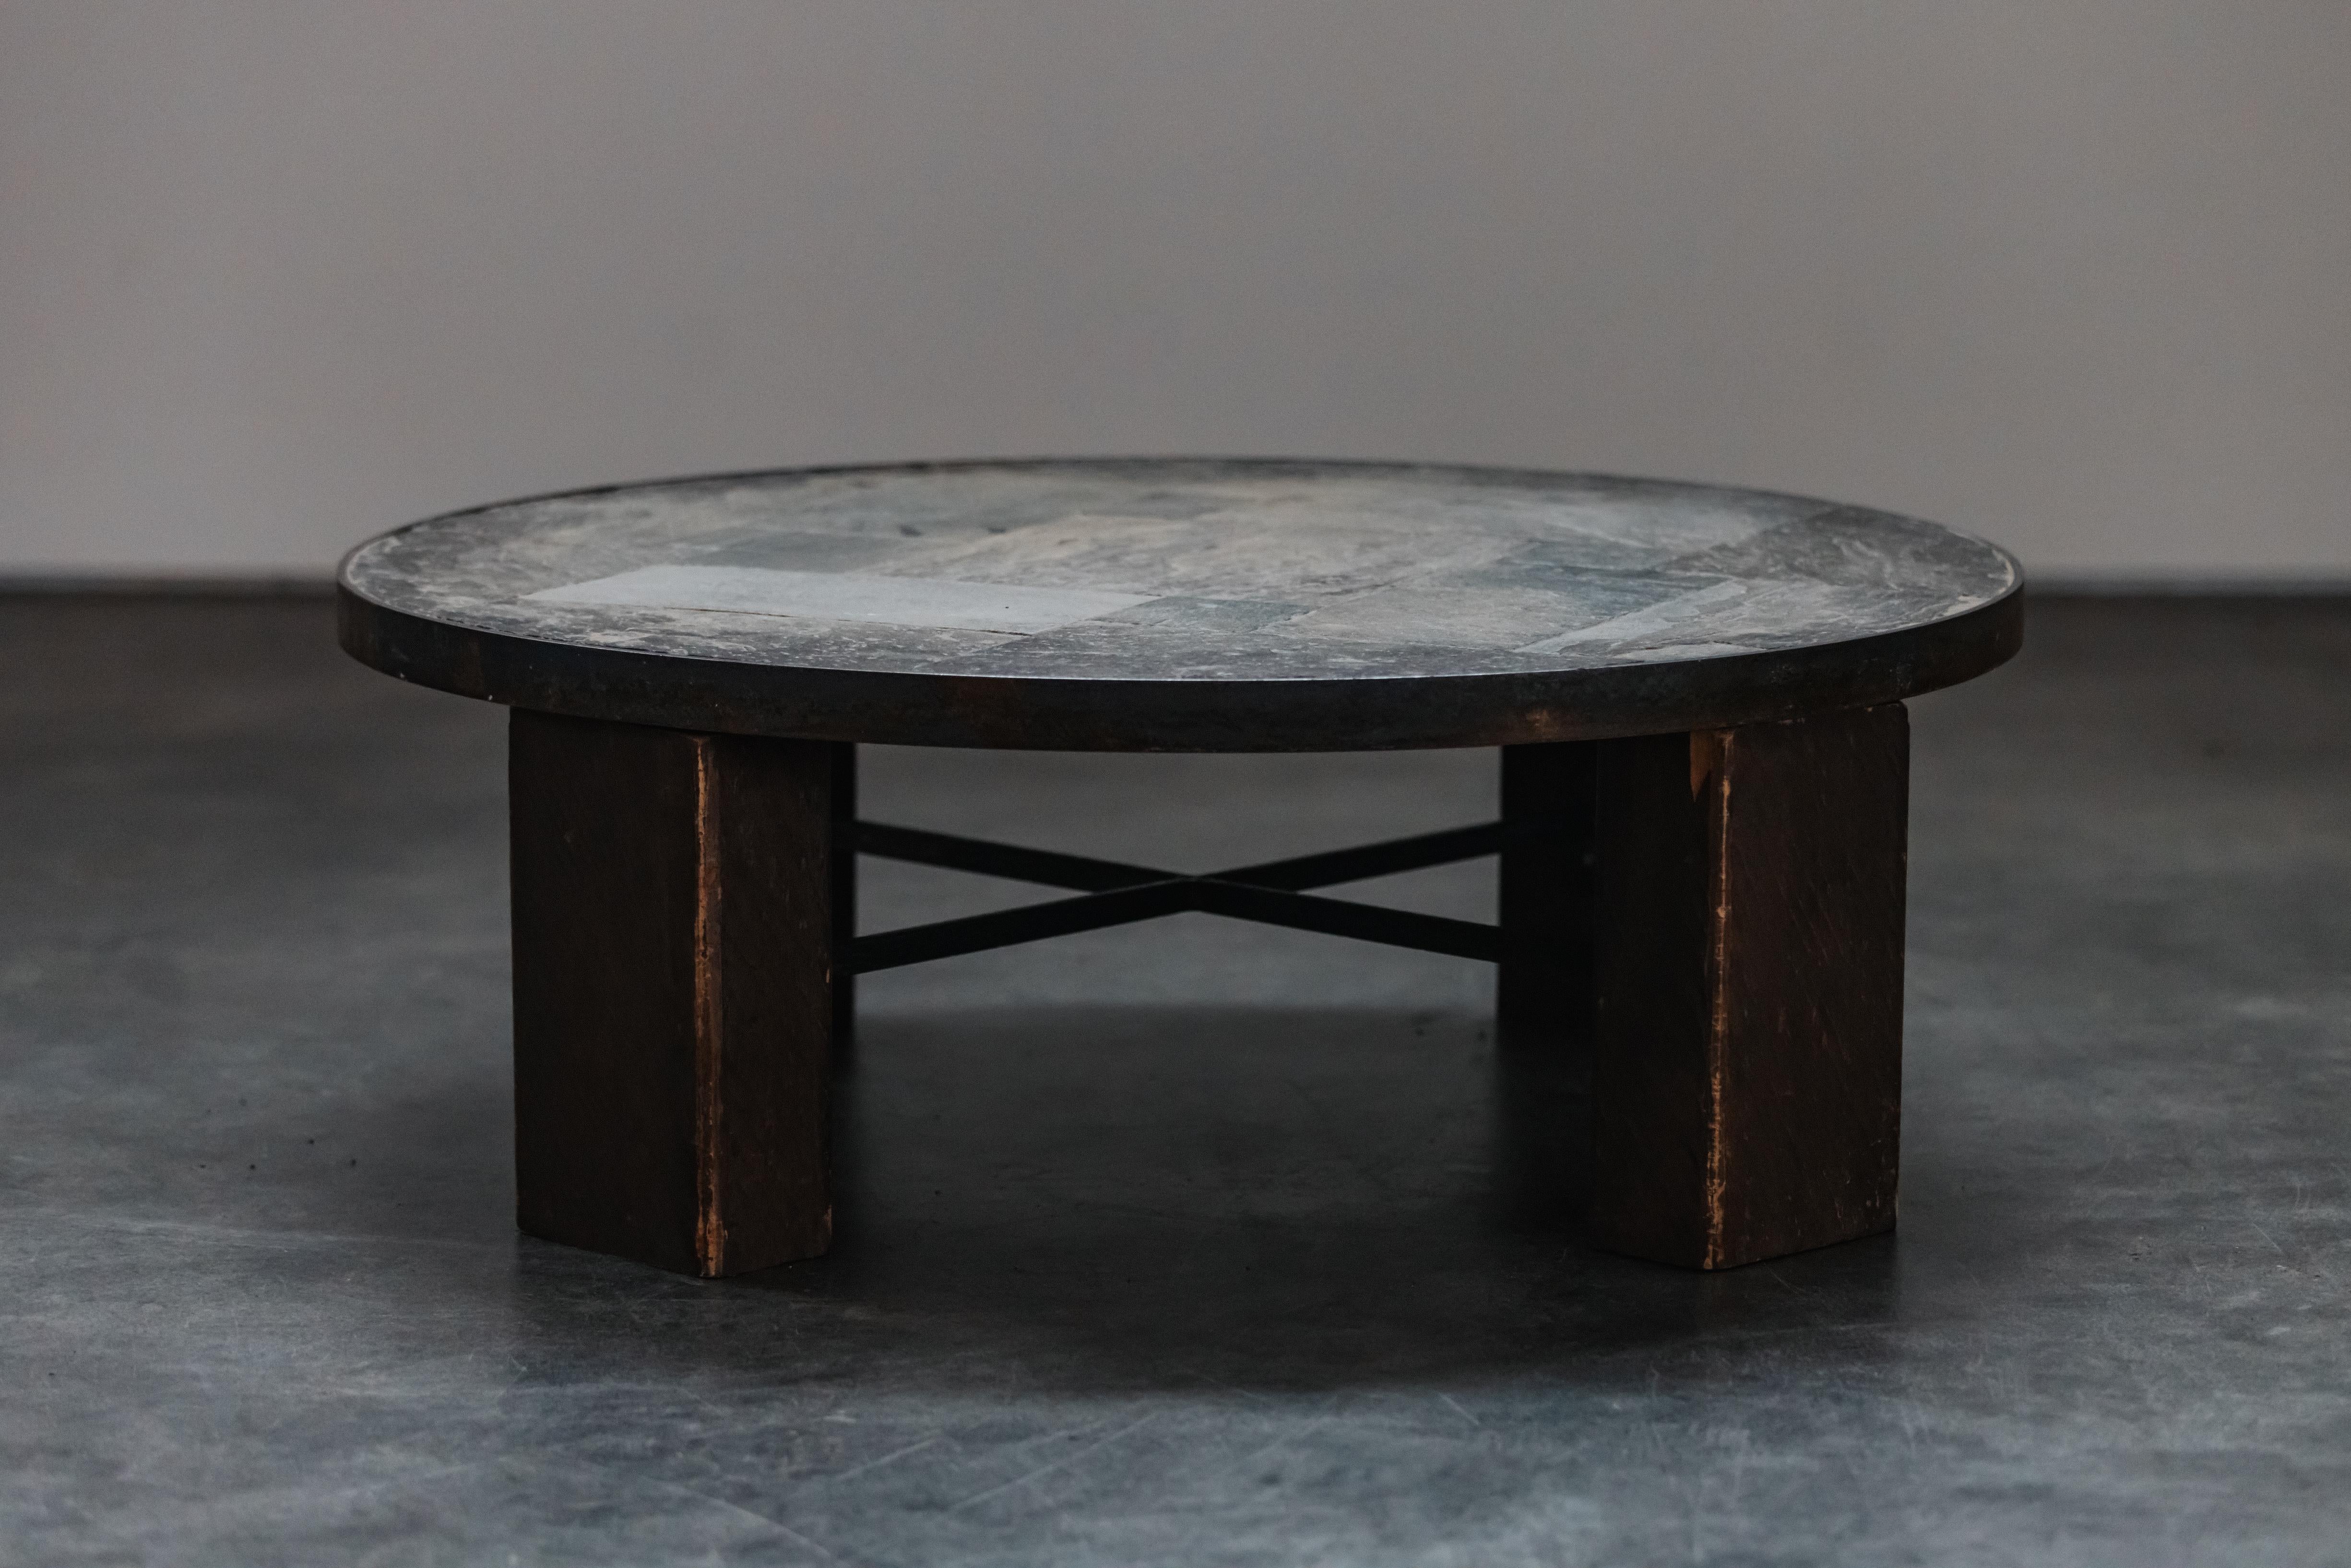 Vintage Slate Stone Coffee Table From France, Circa 1970 For Sale 4